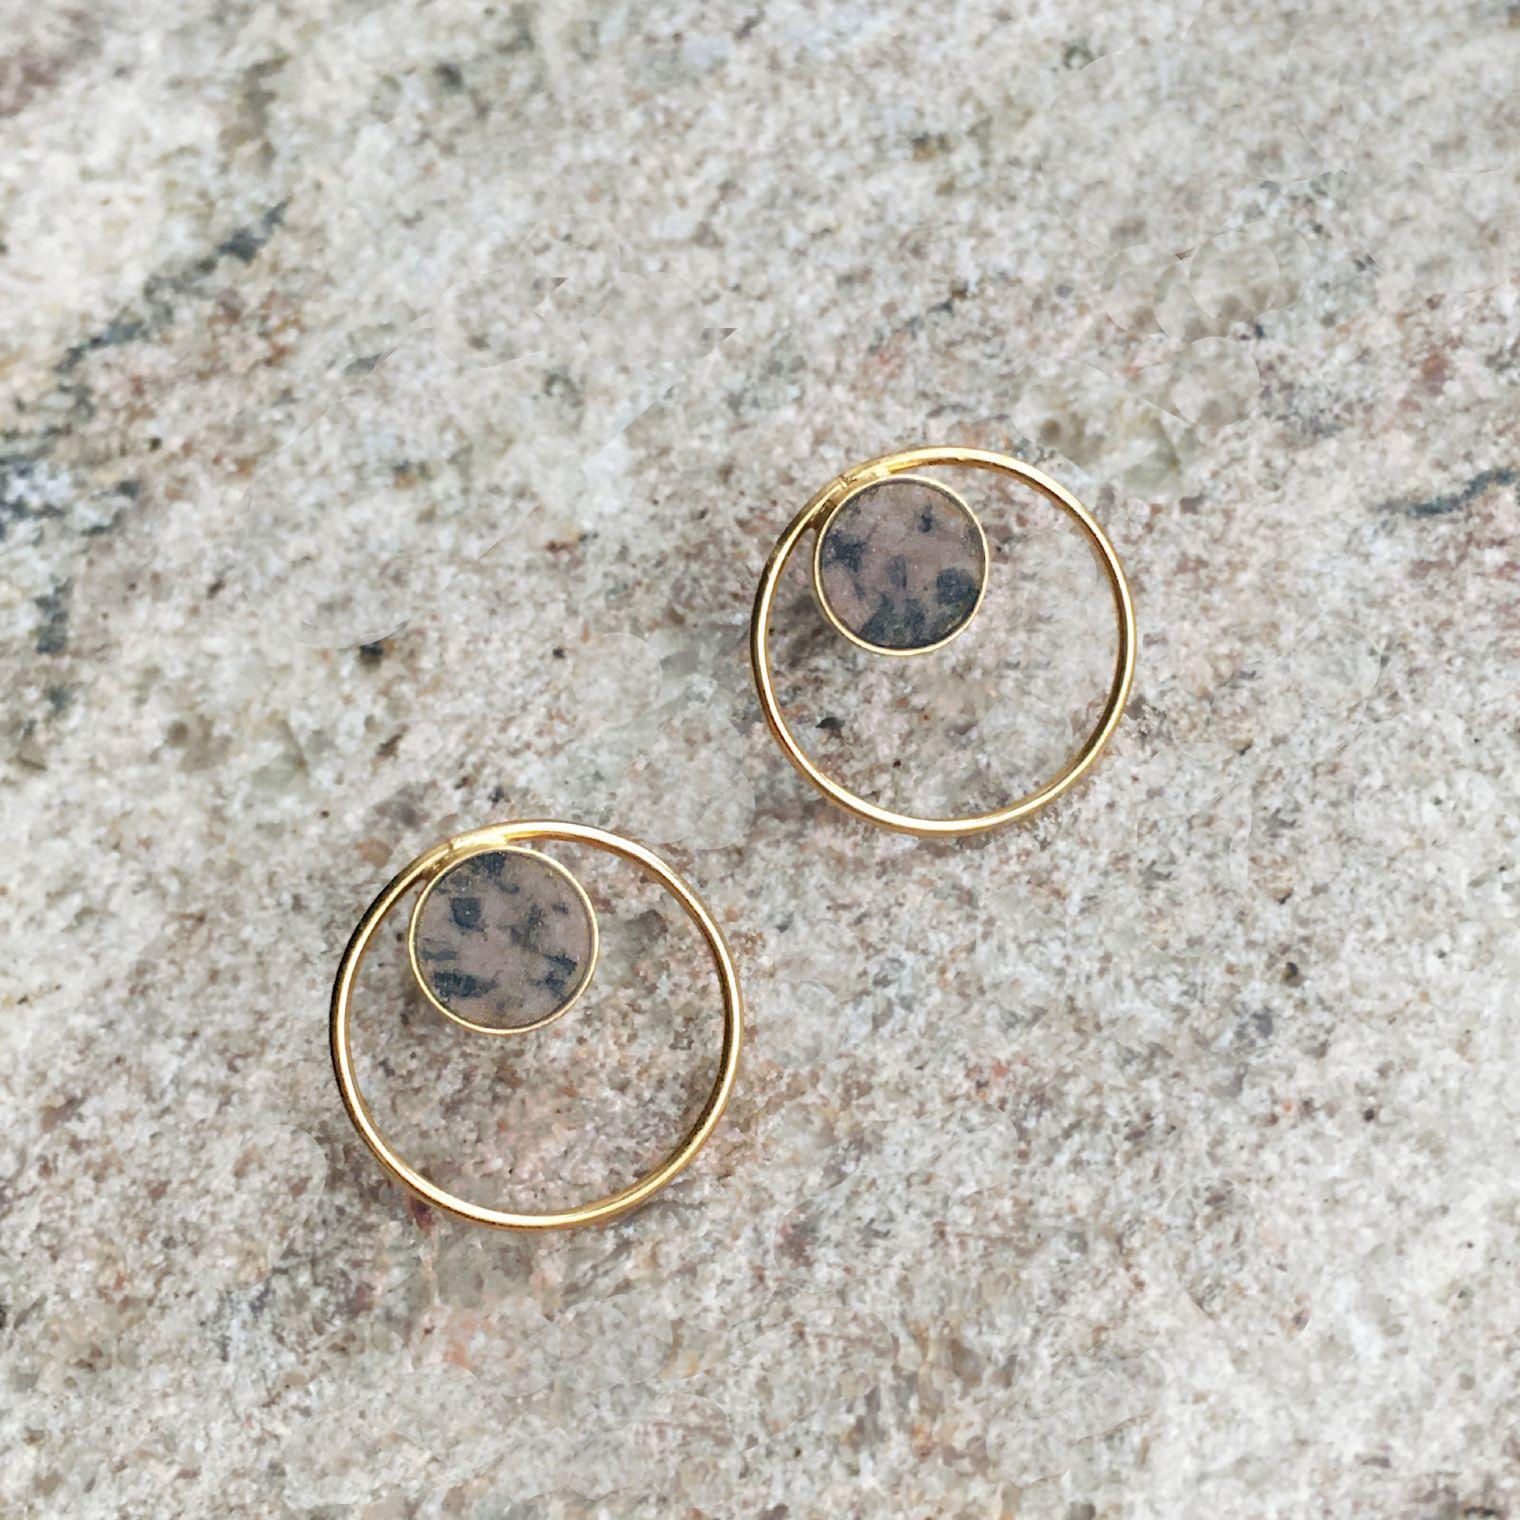 The earrings with pink grey stone are part of a collection whose leitmotif is the perfection of the circle shape. It symbolises completeness, harmony and femininity. Add an extra touch to your look with these simple yet extraordinary earrings. Even